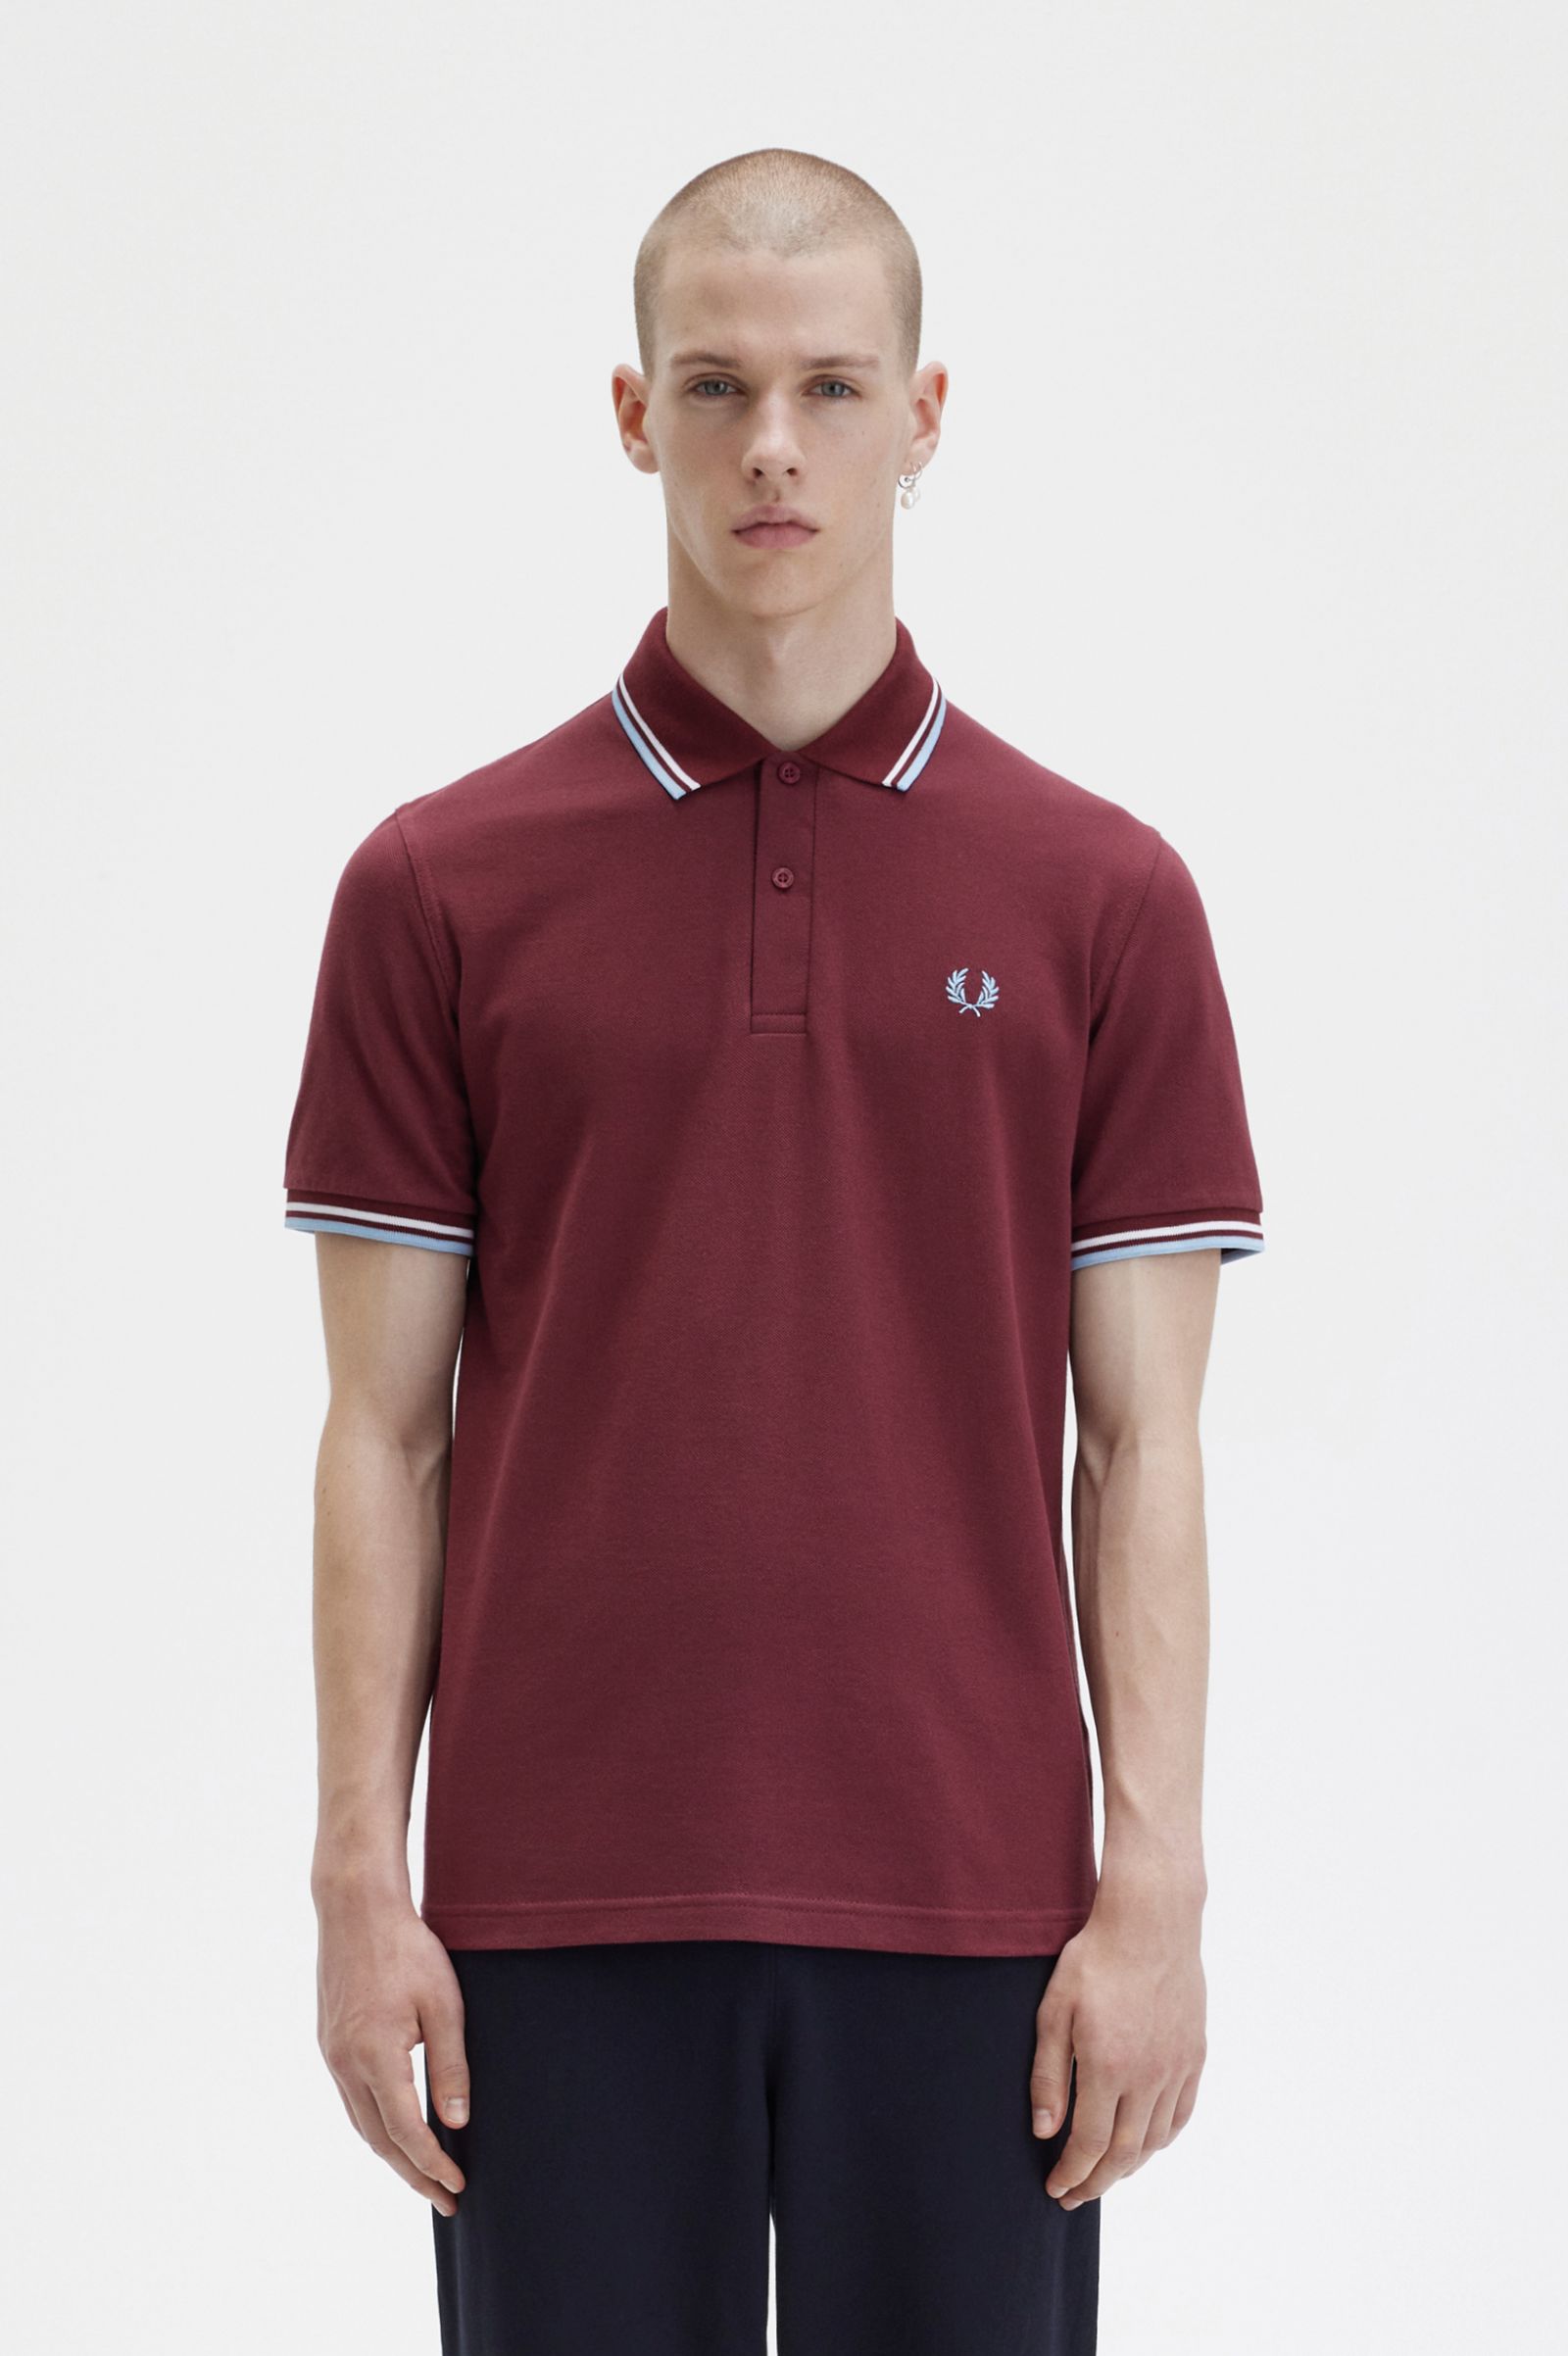 M12 - / White / Ice | The Fred Perry Shirt | Men's Short & Long Sleeve Shirts | Fred Perry UK